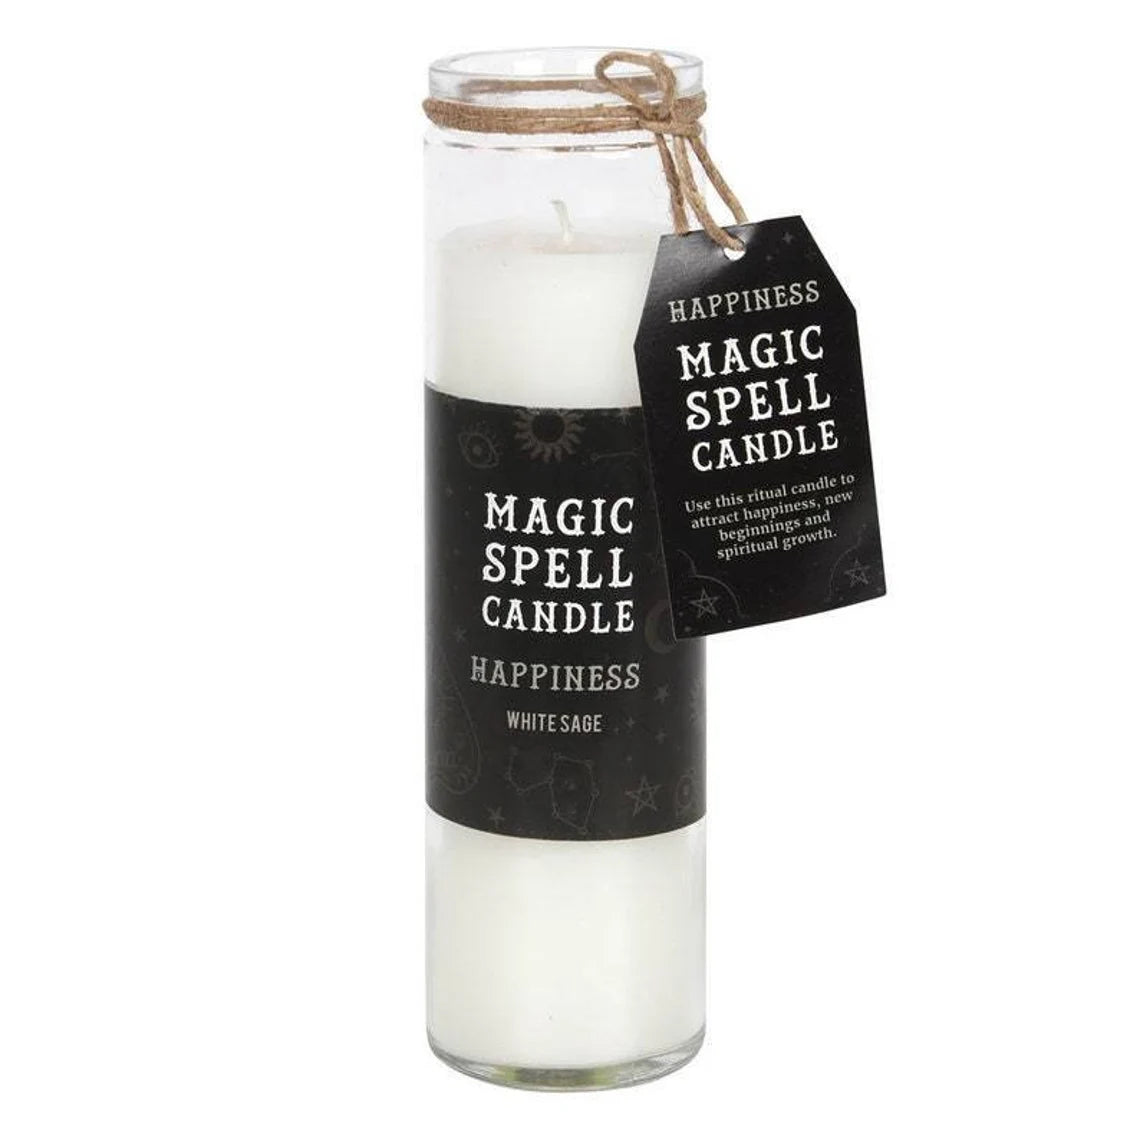 Spell Candle in Tall Glass